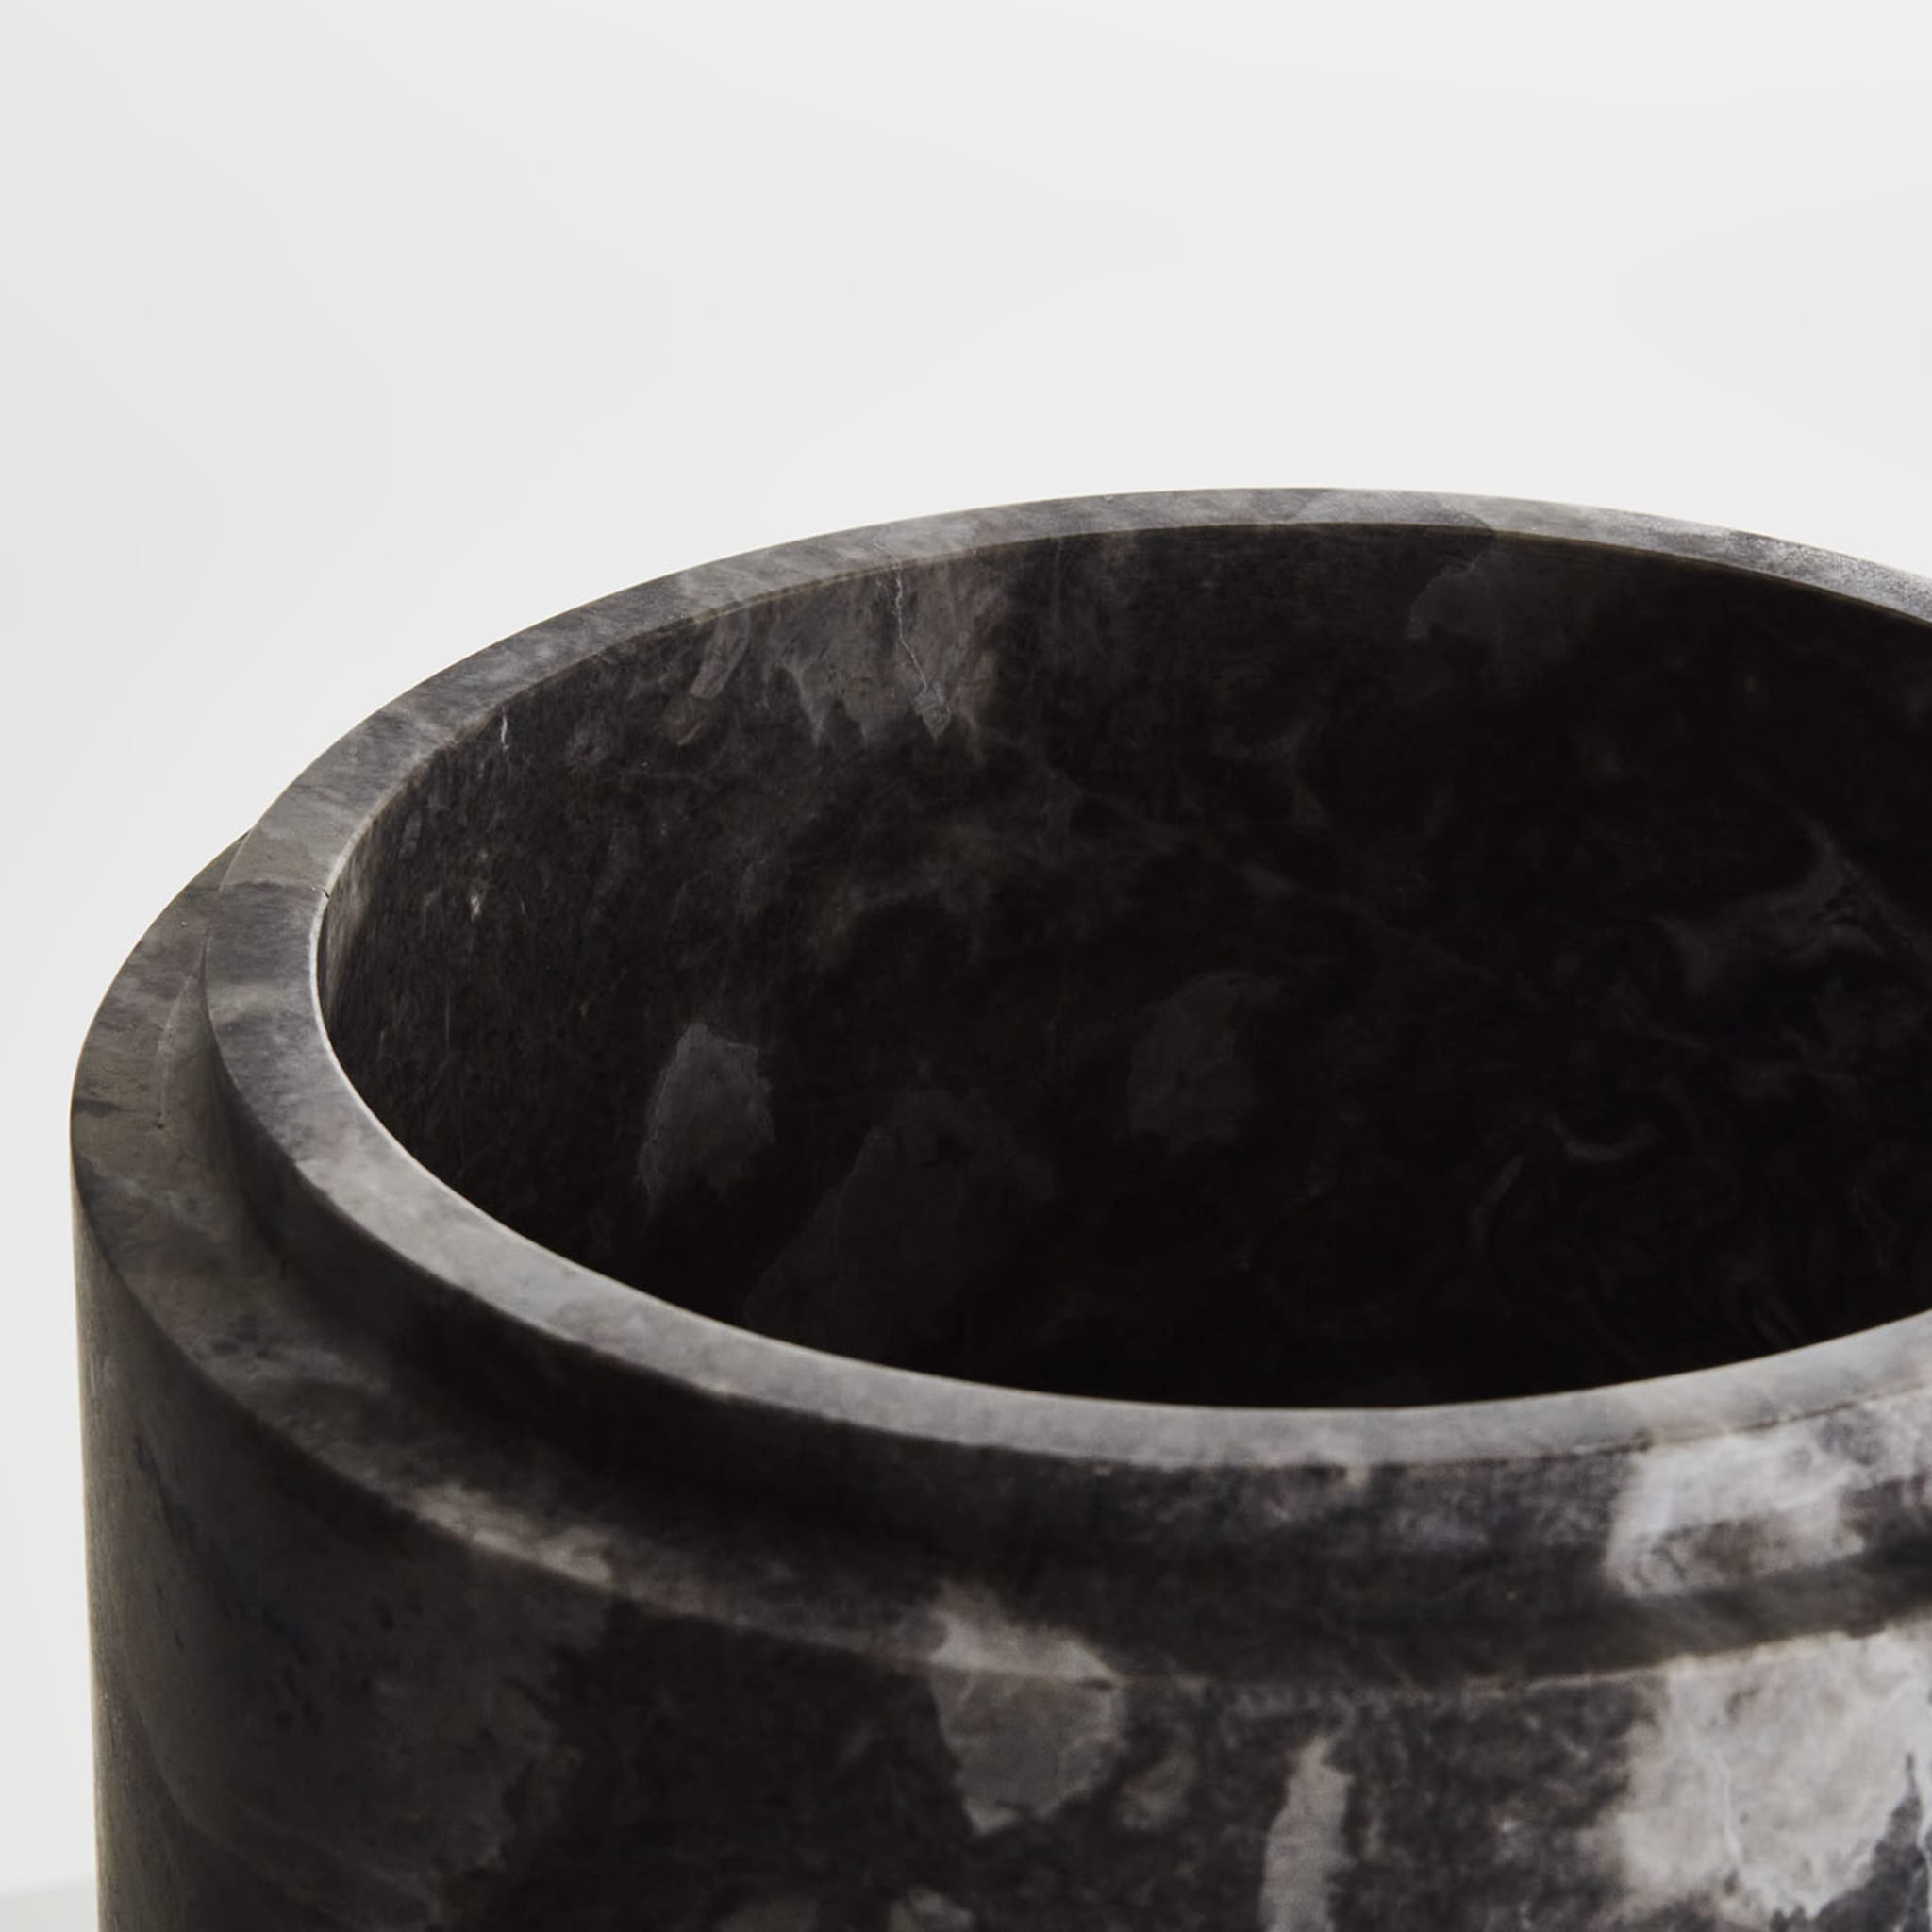 Royal Small Gray Vase by Christophe Pillet - Alternative view 1